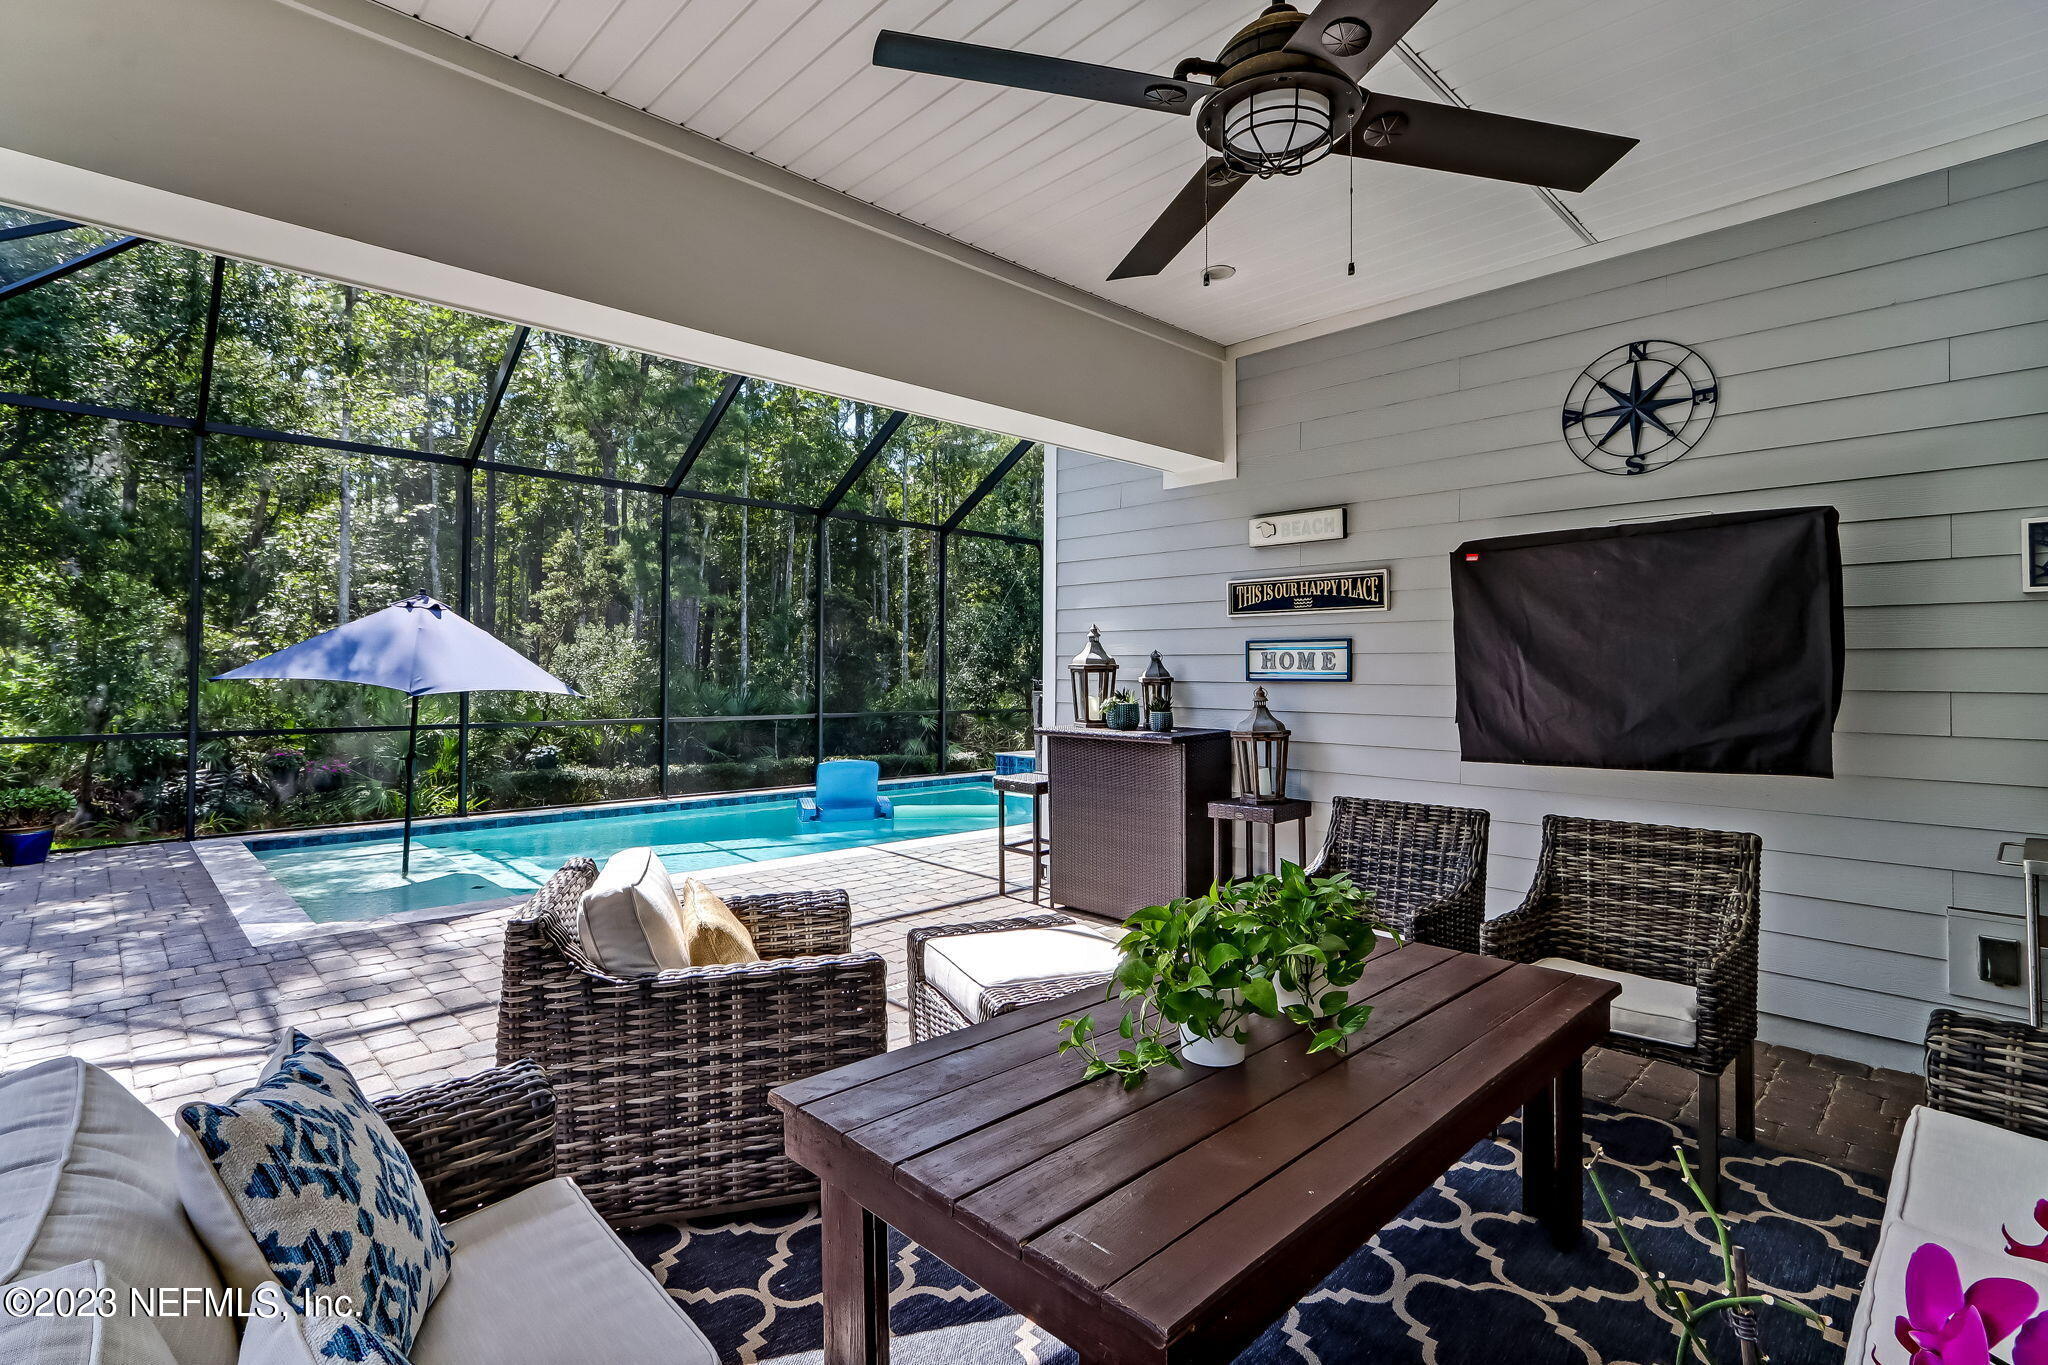 a outdoor space with patio lots of furniture and white umbrellas